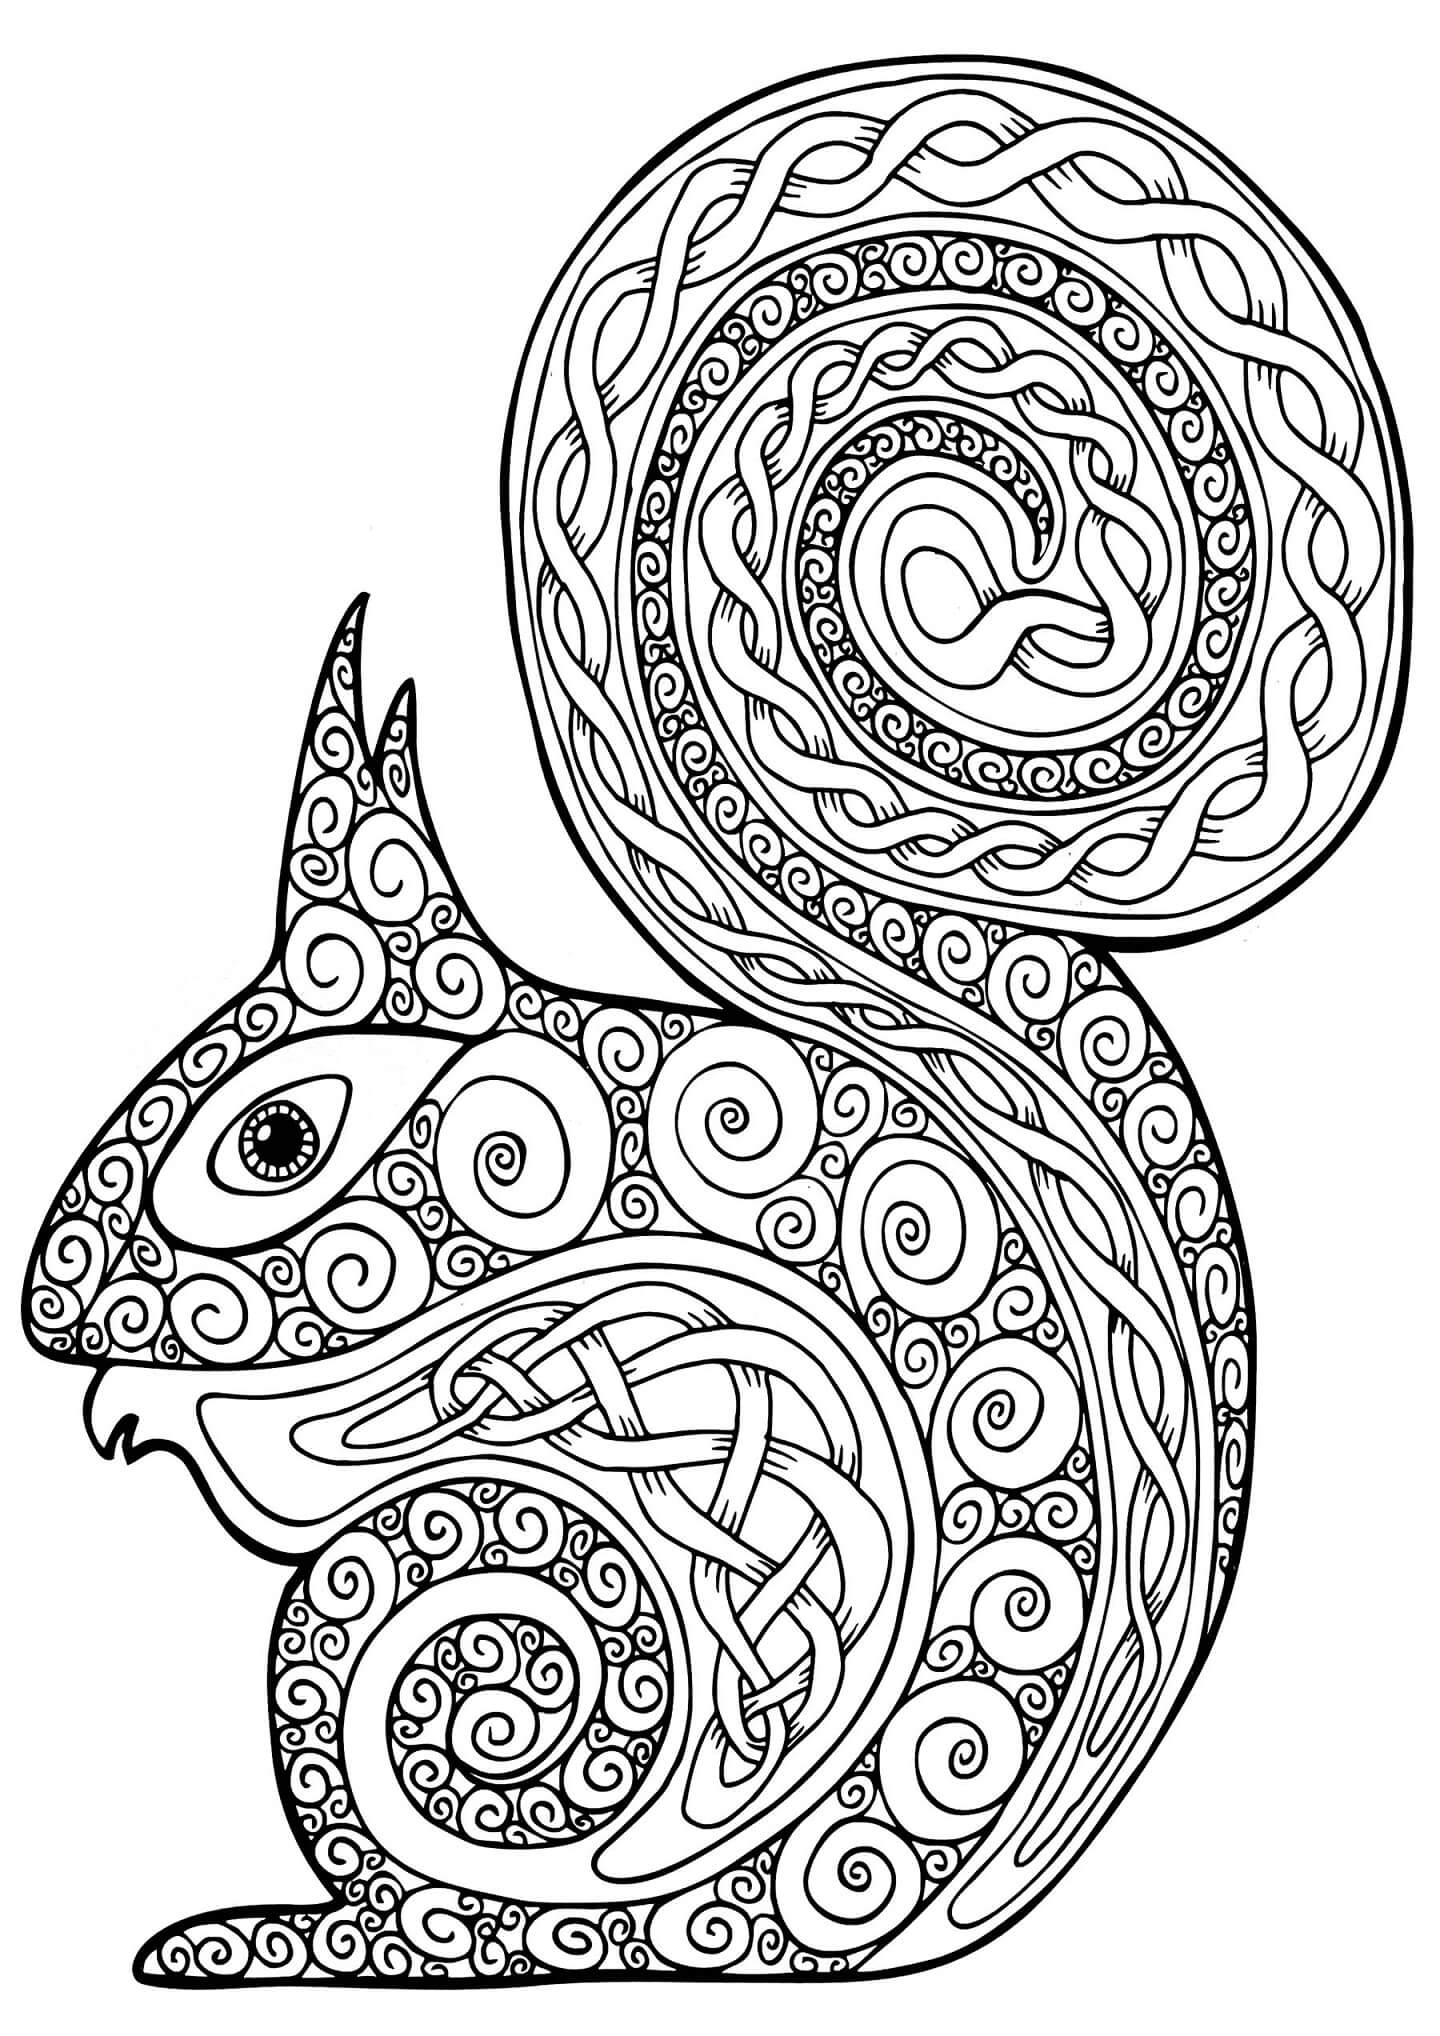 Mandala Cute Squirrel Coloring Page - Download, Print Now!